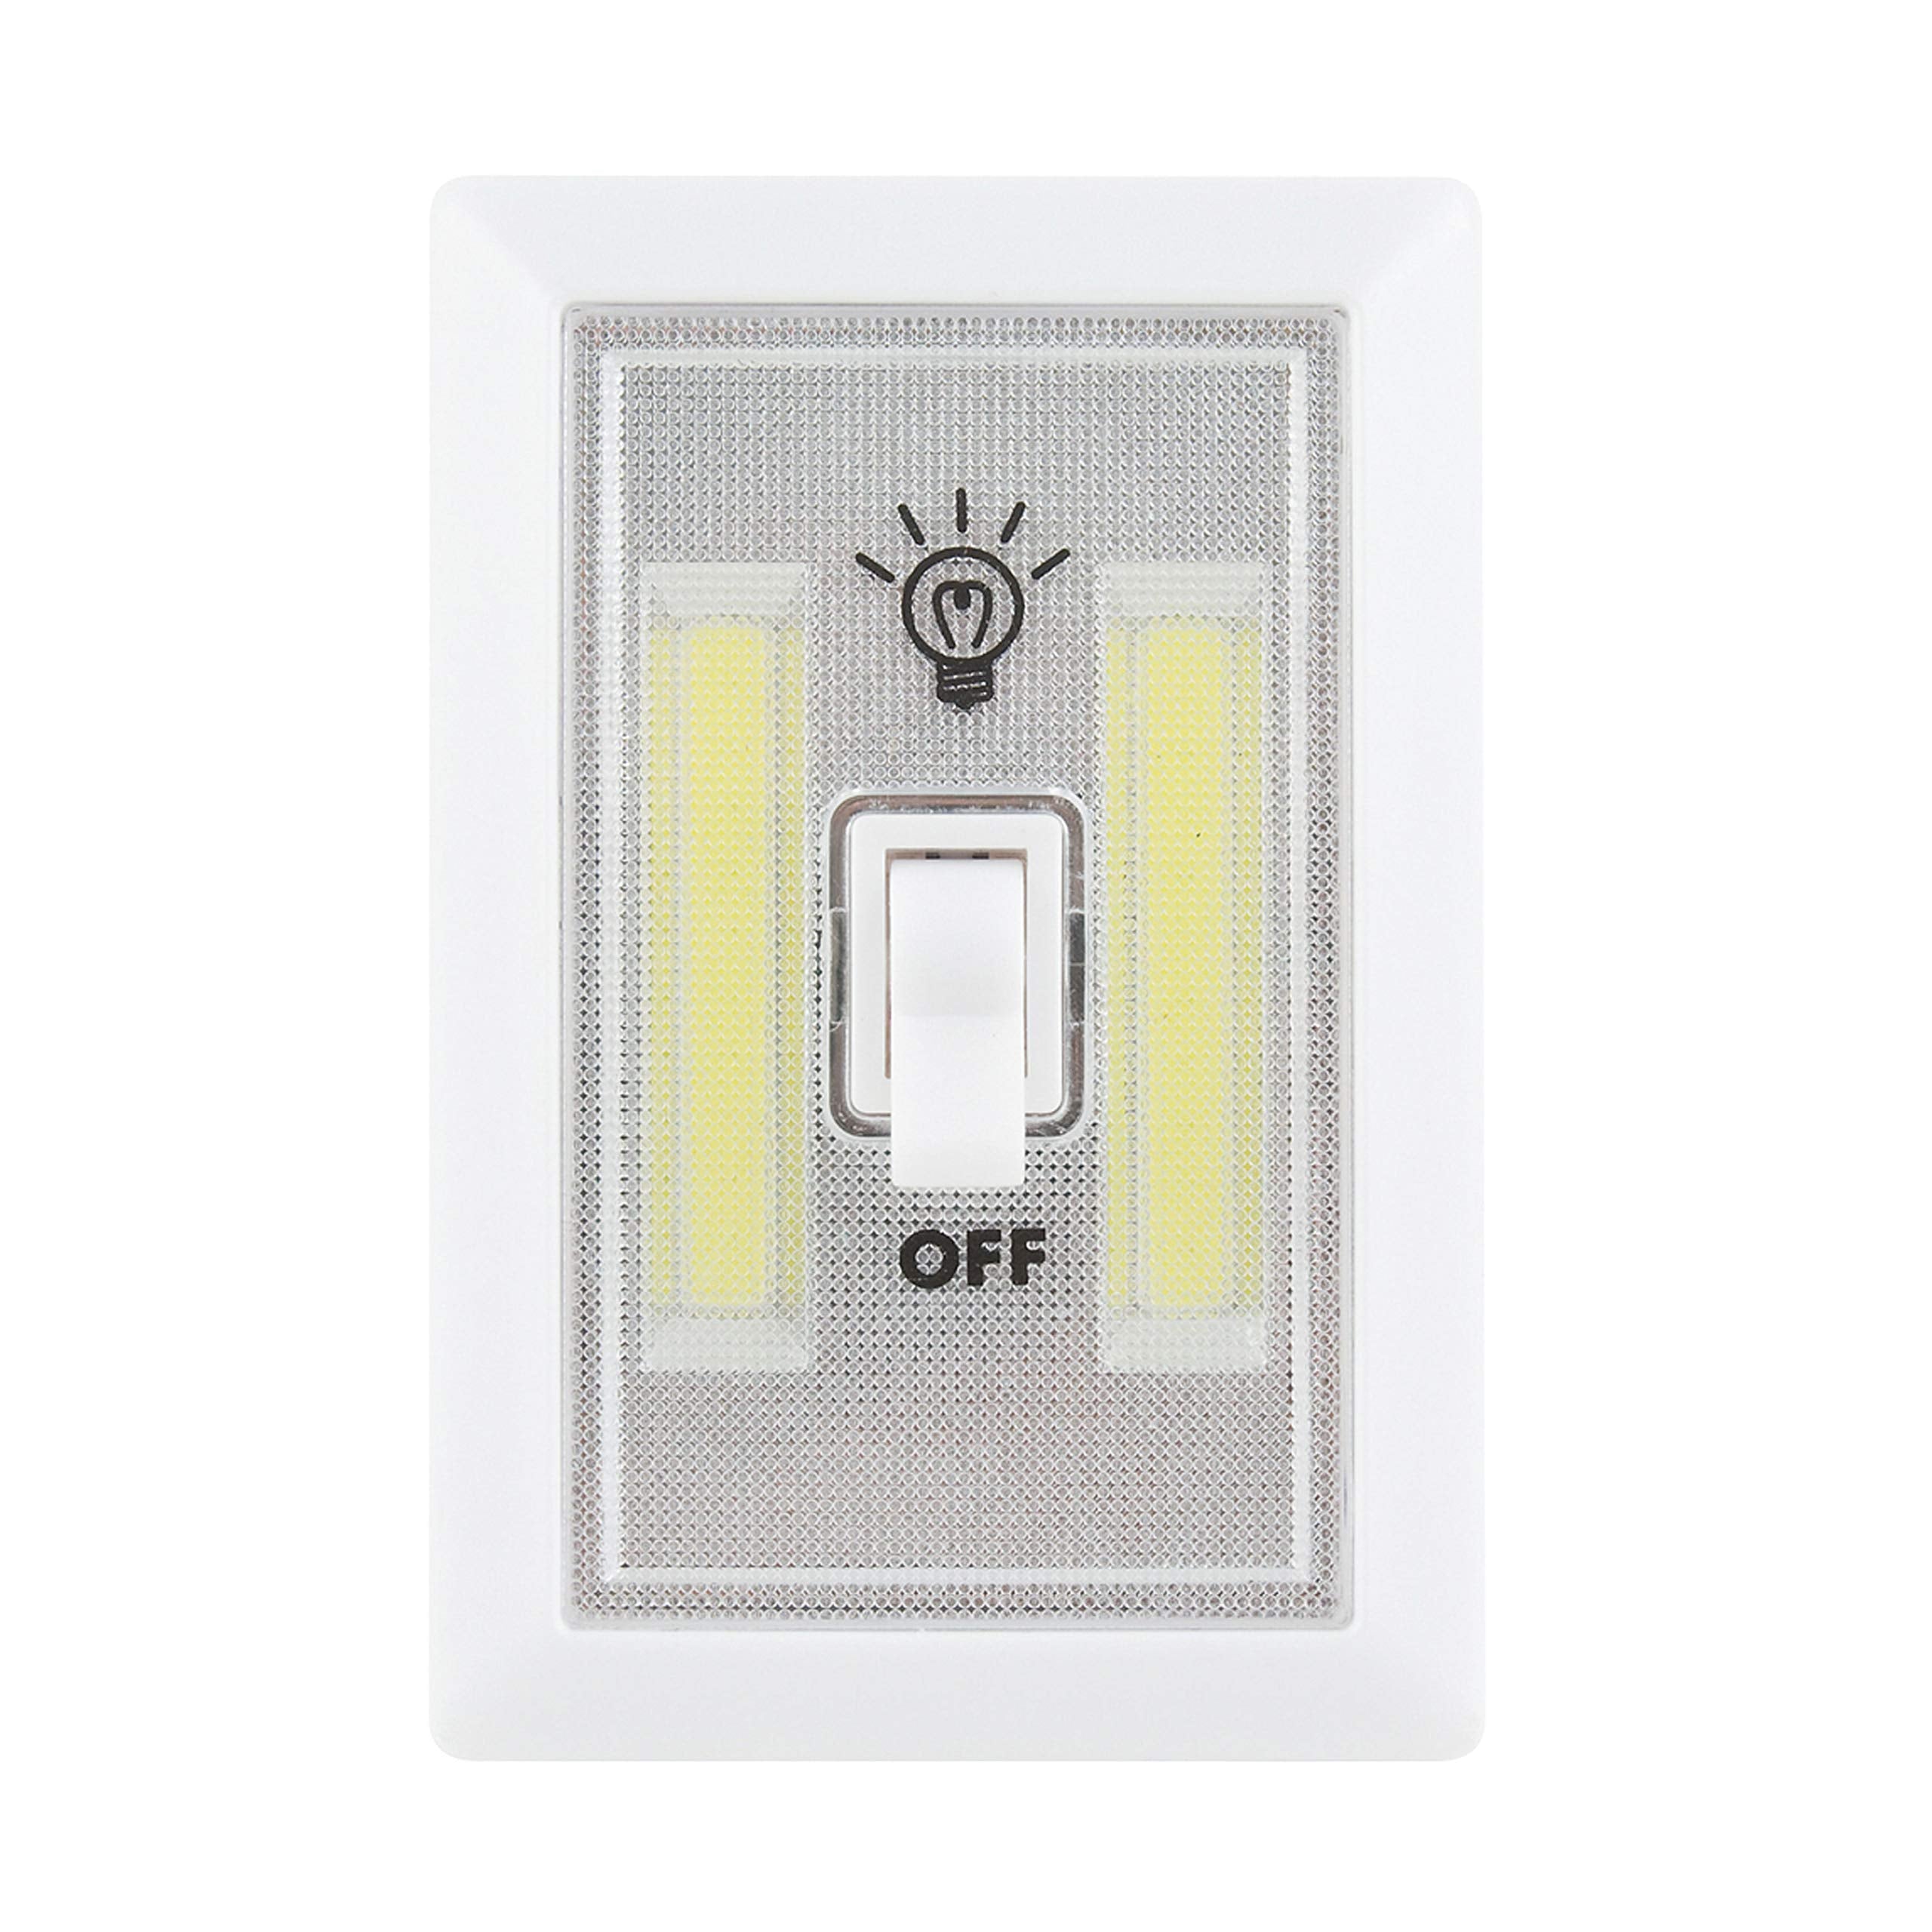 AP Products 025-020 Glow Max Cordless Light Switch - 200 Lumens